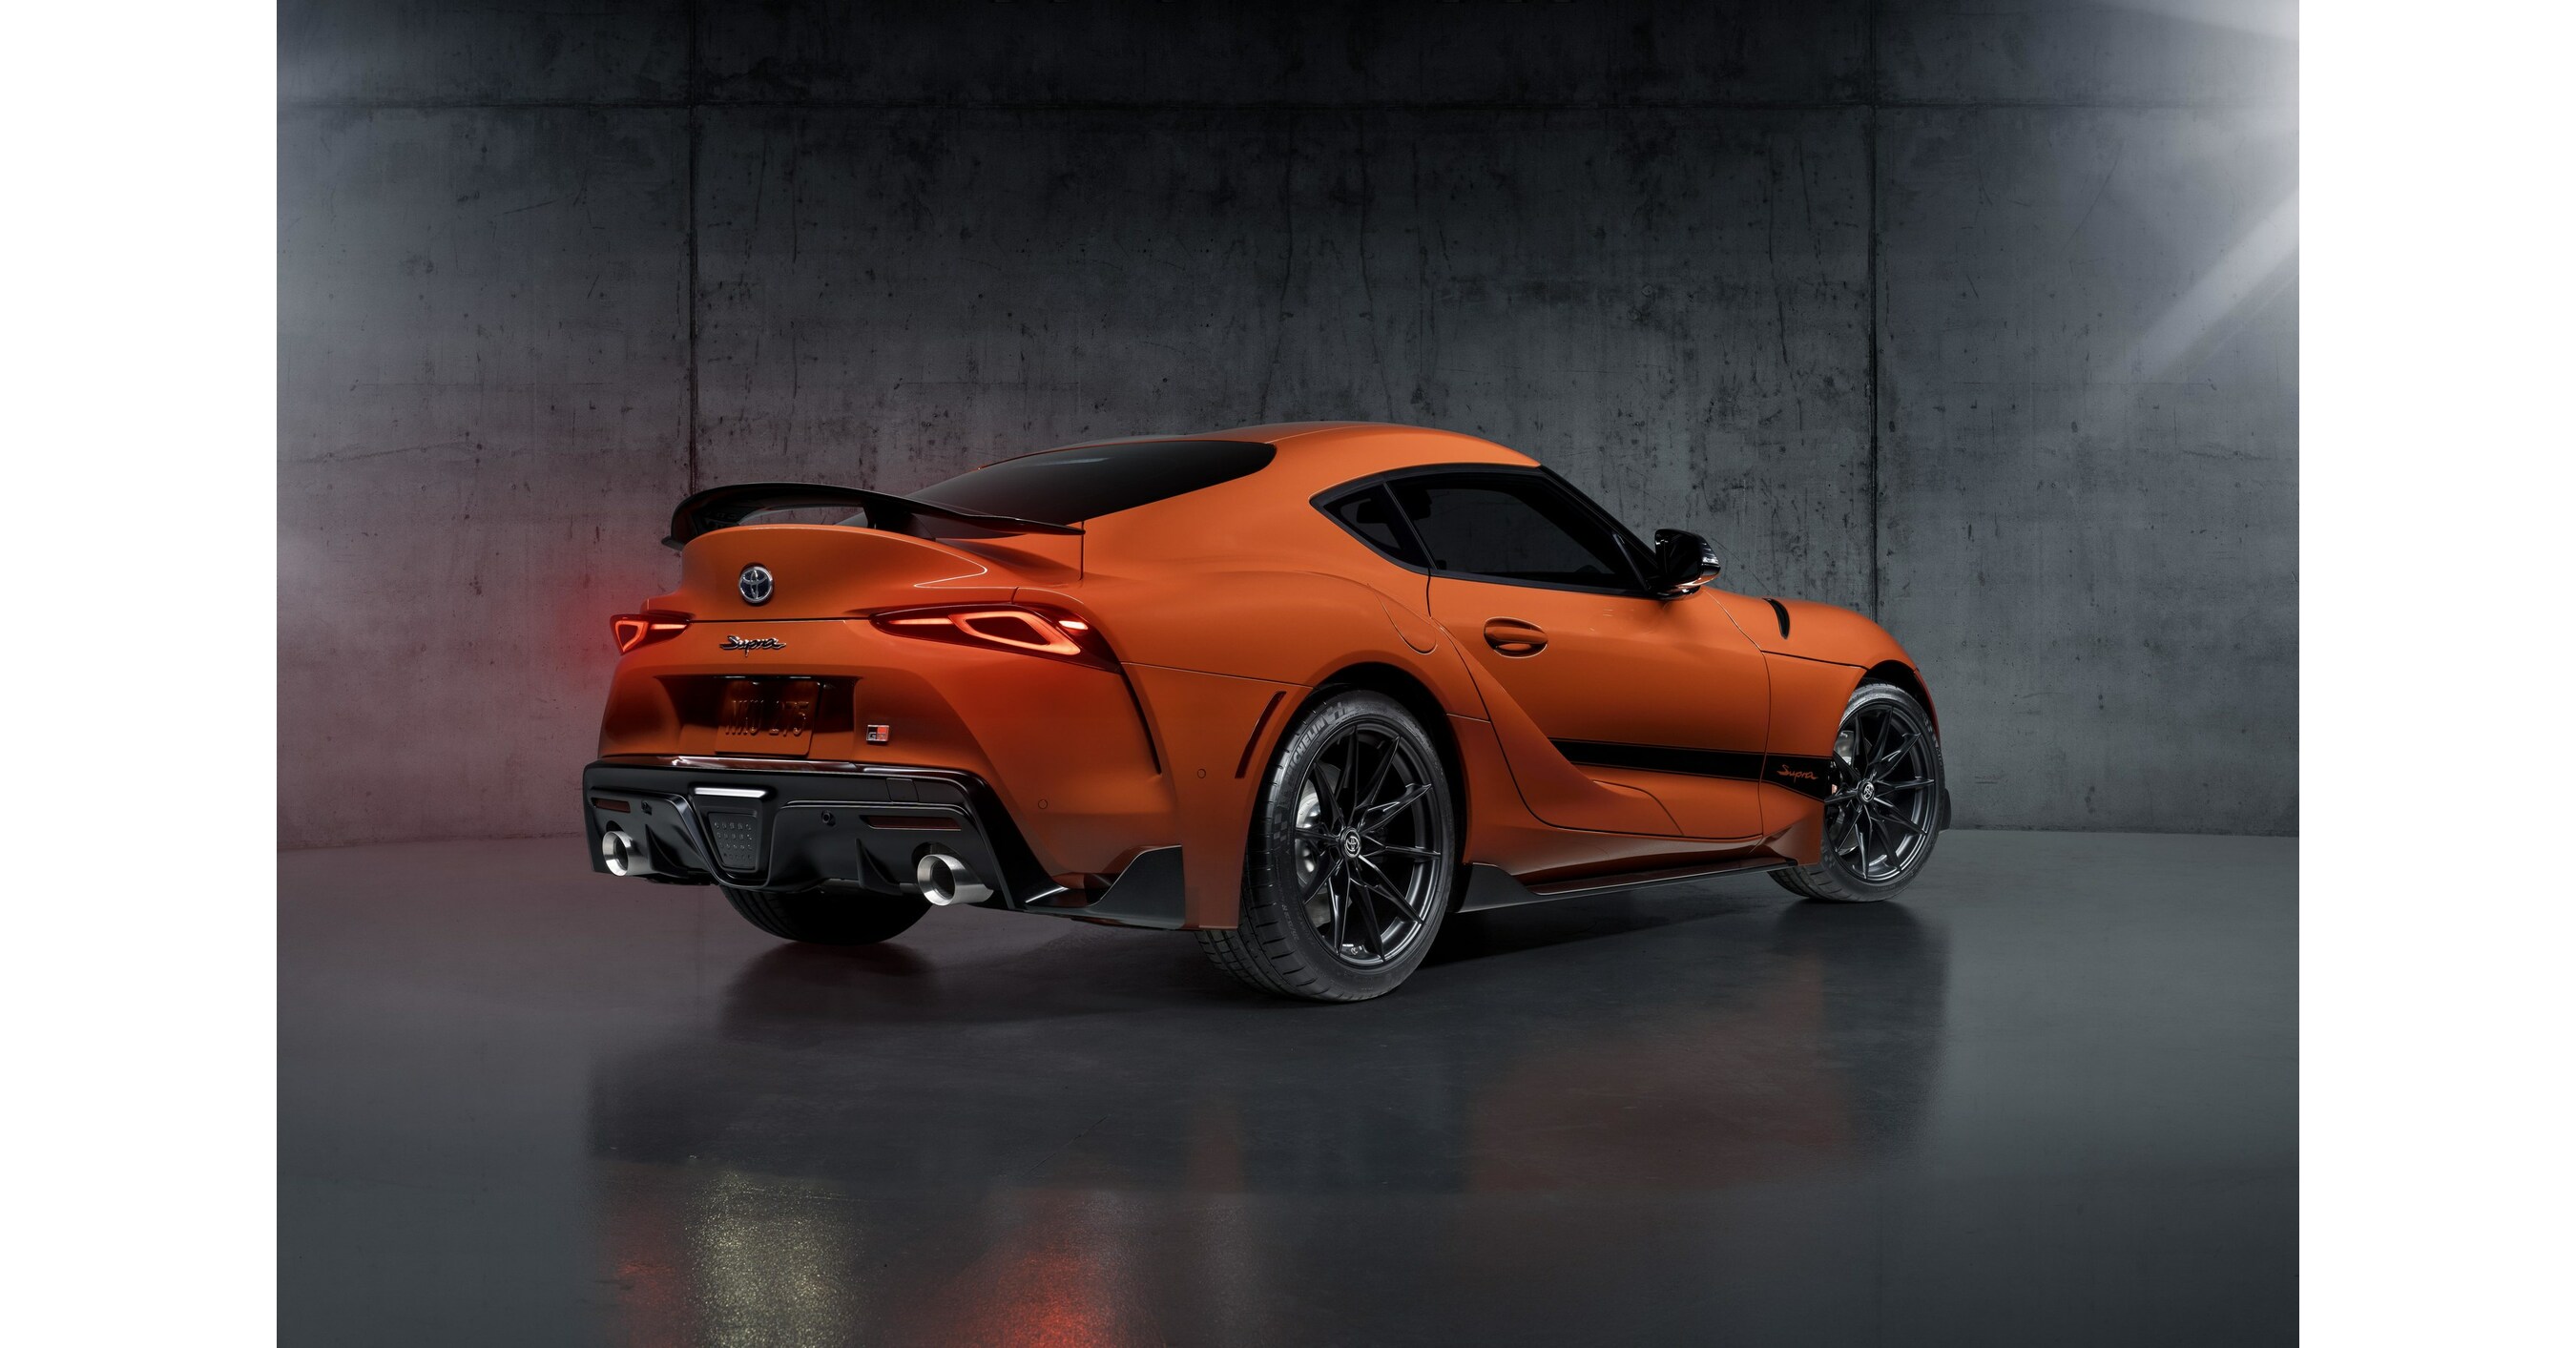 What If The Mk5 Toyota Supra Looked More Like Its Mk4 Predecessor?